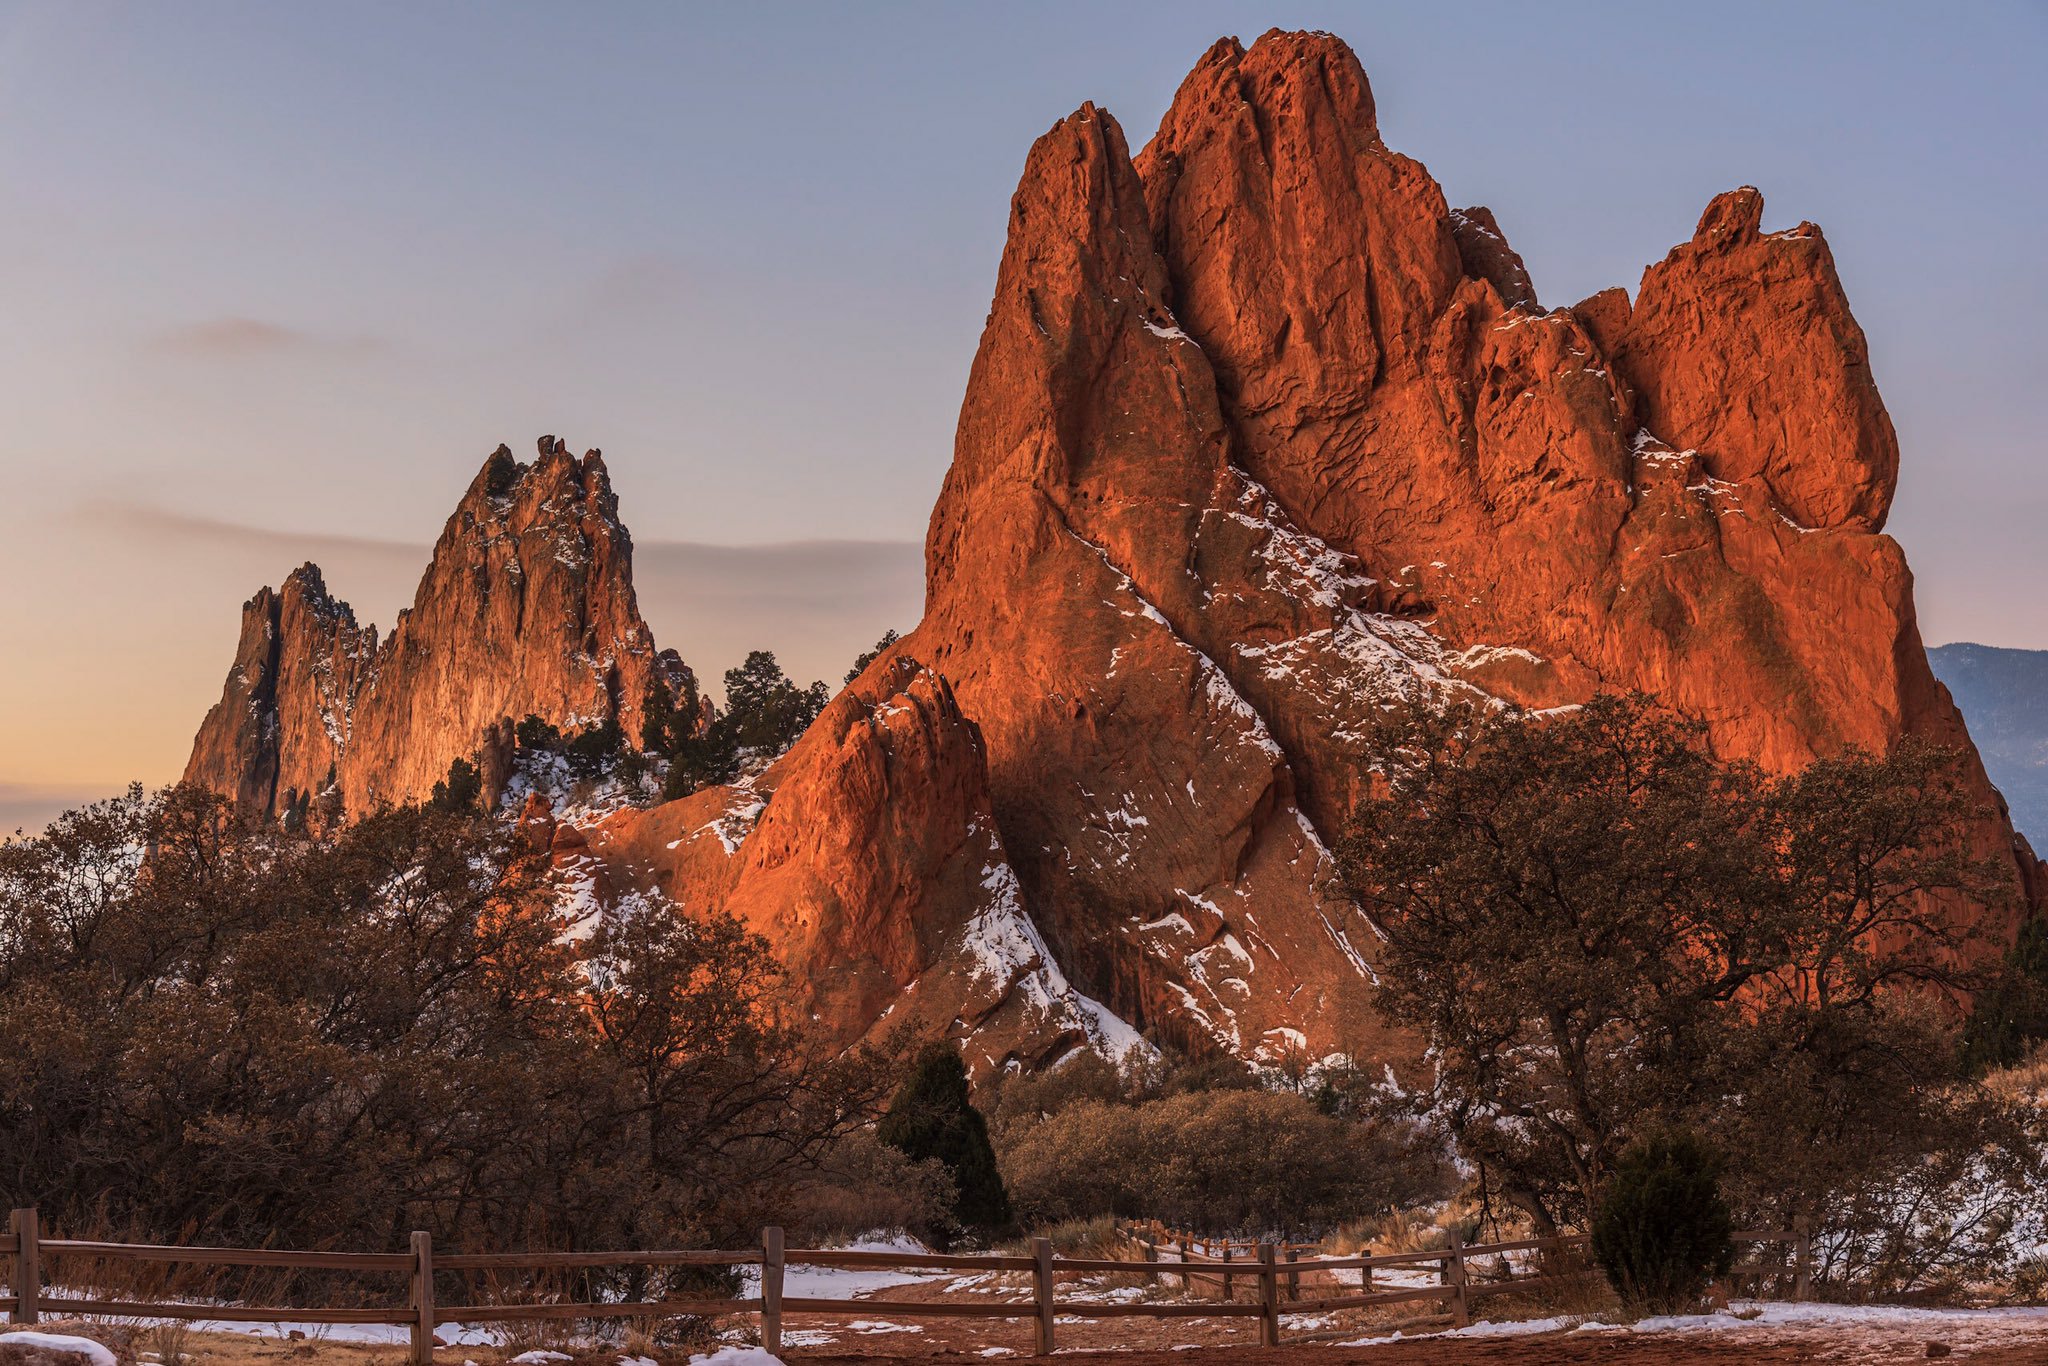 First light with a dusting of snow at Garden of the Gods, Colorado by Michael Ryno Photo @mnryno34